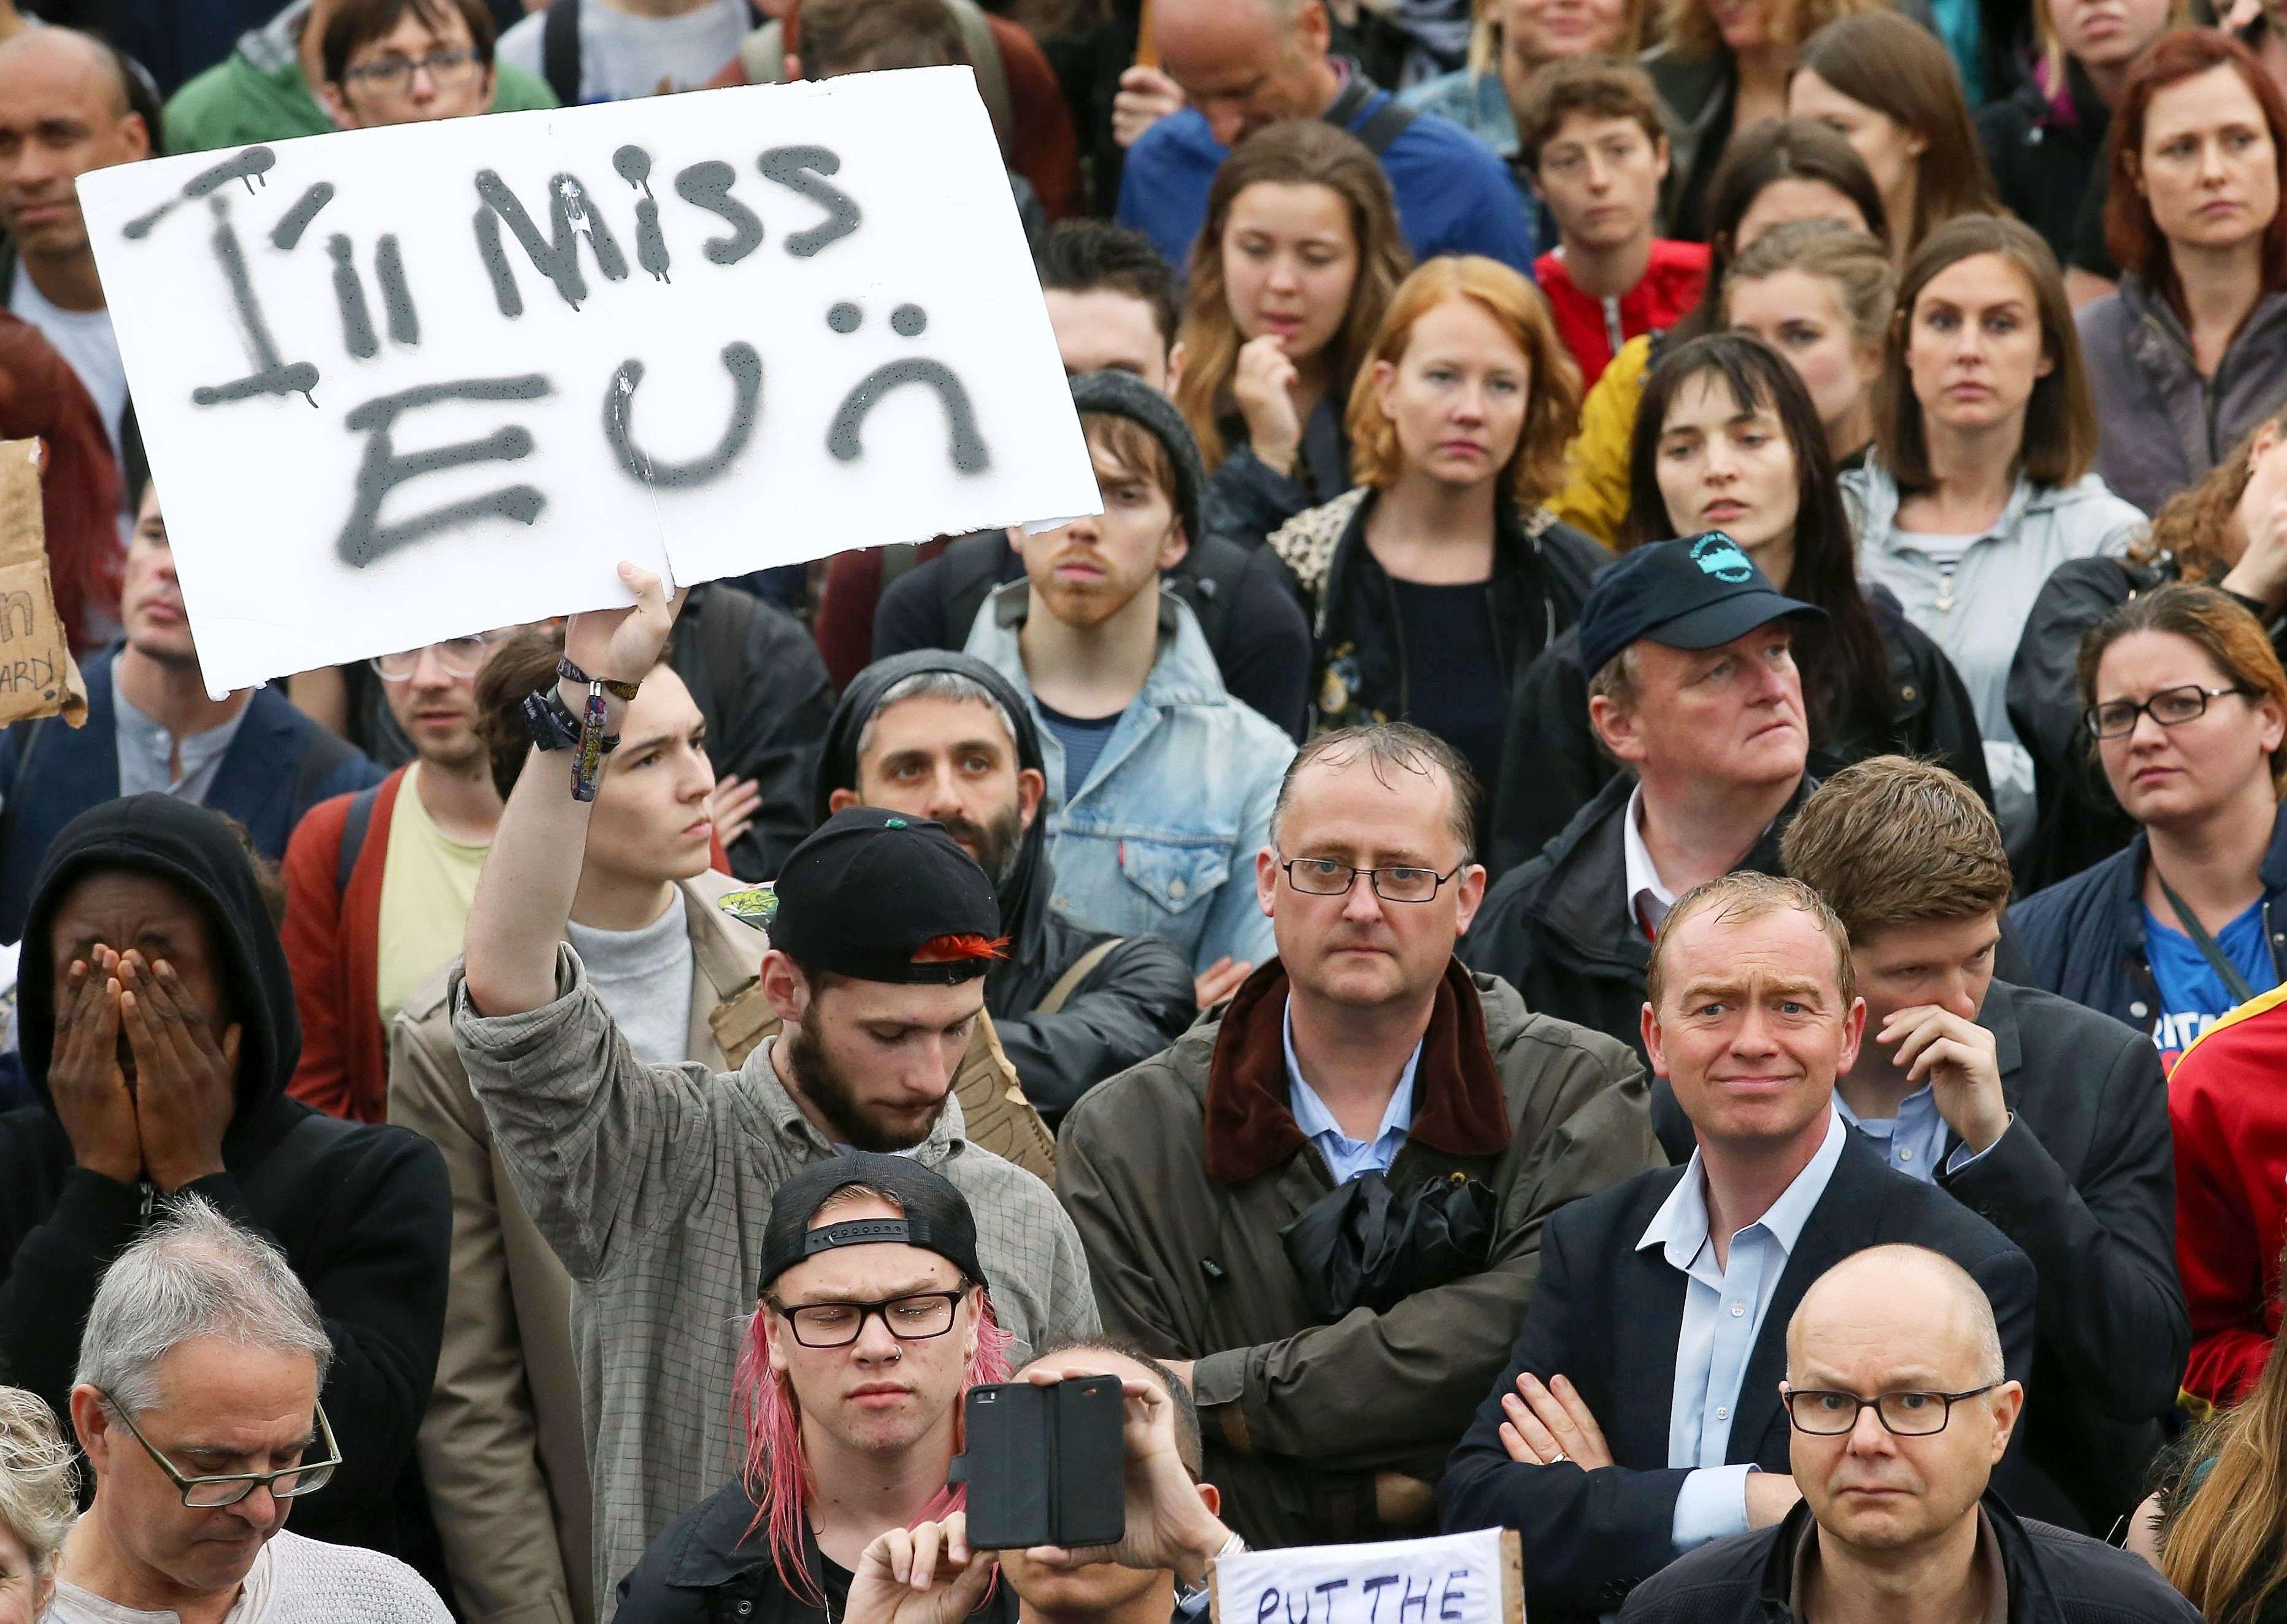 Britain's Liberal Democrats Party leader Tim Farron (below right, blue shirt) joins people at an anti-Brexit protest in Trafalgar Square in central London on June 28, 2016. EU leaders attempted to rescue the European project and Prime Minister David Cameron sought to calm fears over Britain's vote to leave the bloc as ratings agencies downgraded the country. Britain has been pitched into uncertainty by the June 23 referendum result, with Cameron announcing his resignation, the economy facing a string of shocks and Scotland making a fresh threat to break away. / AFP PHOTO / JUSTIN TALLIS